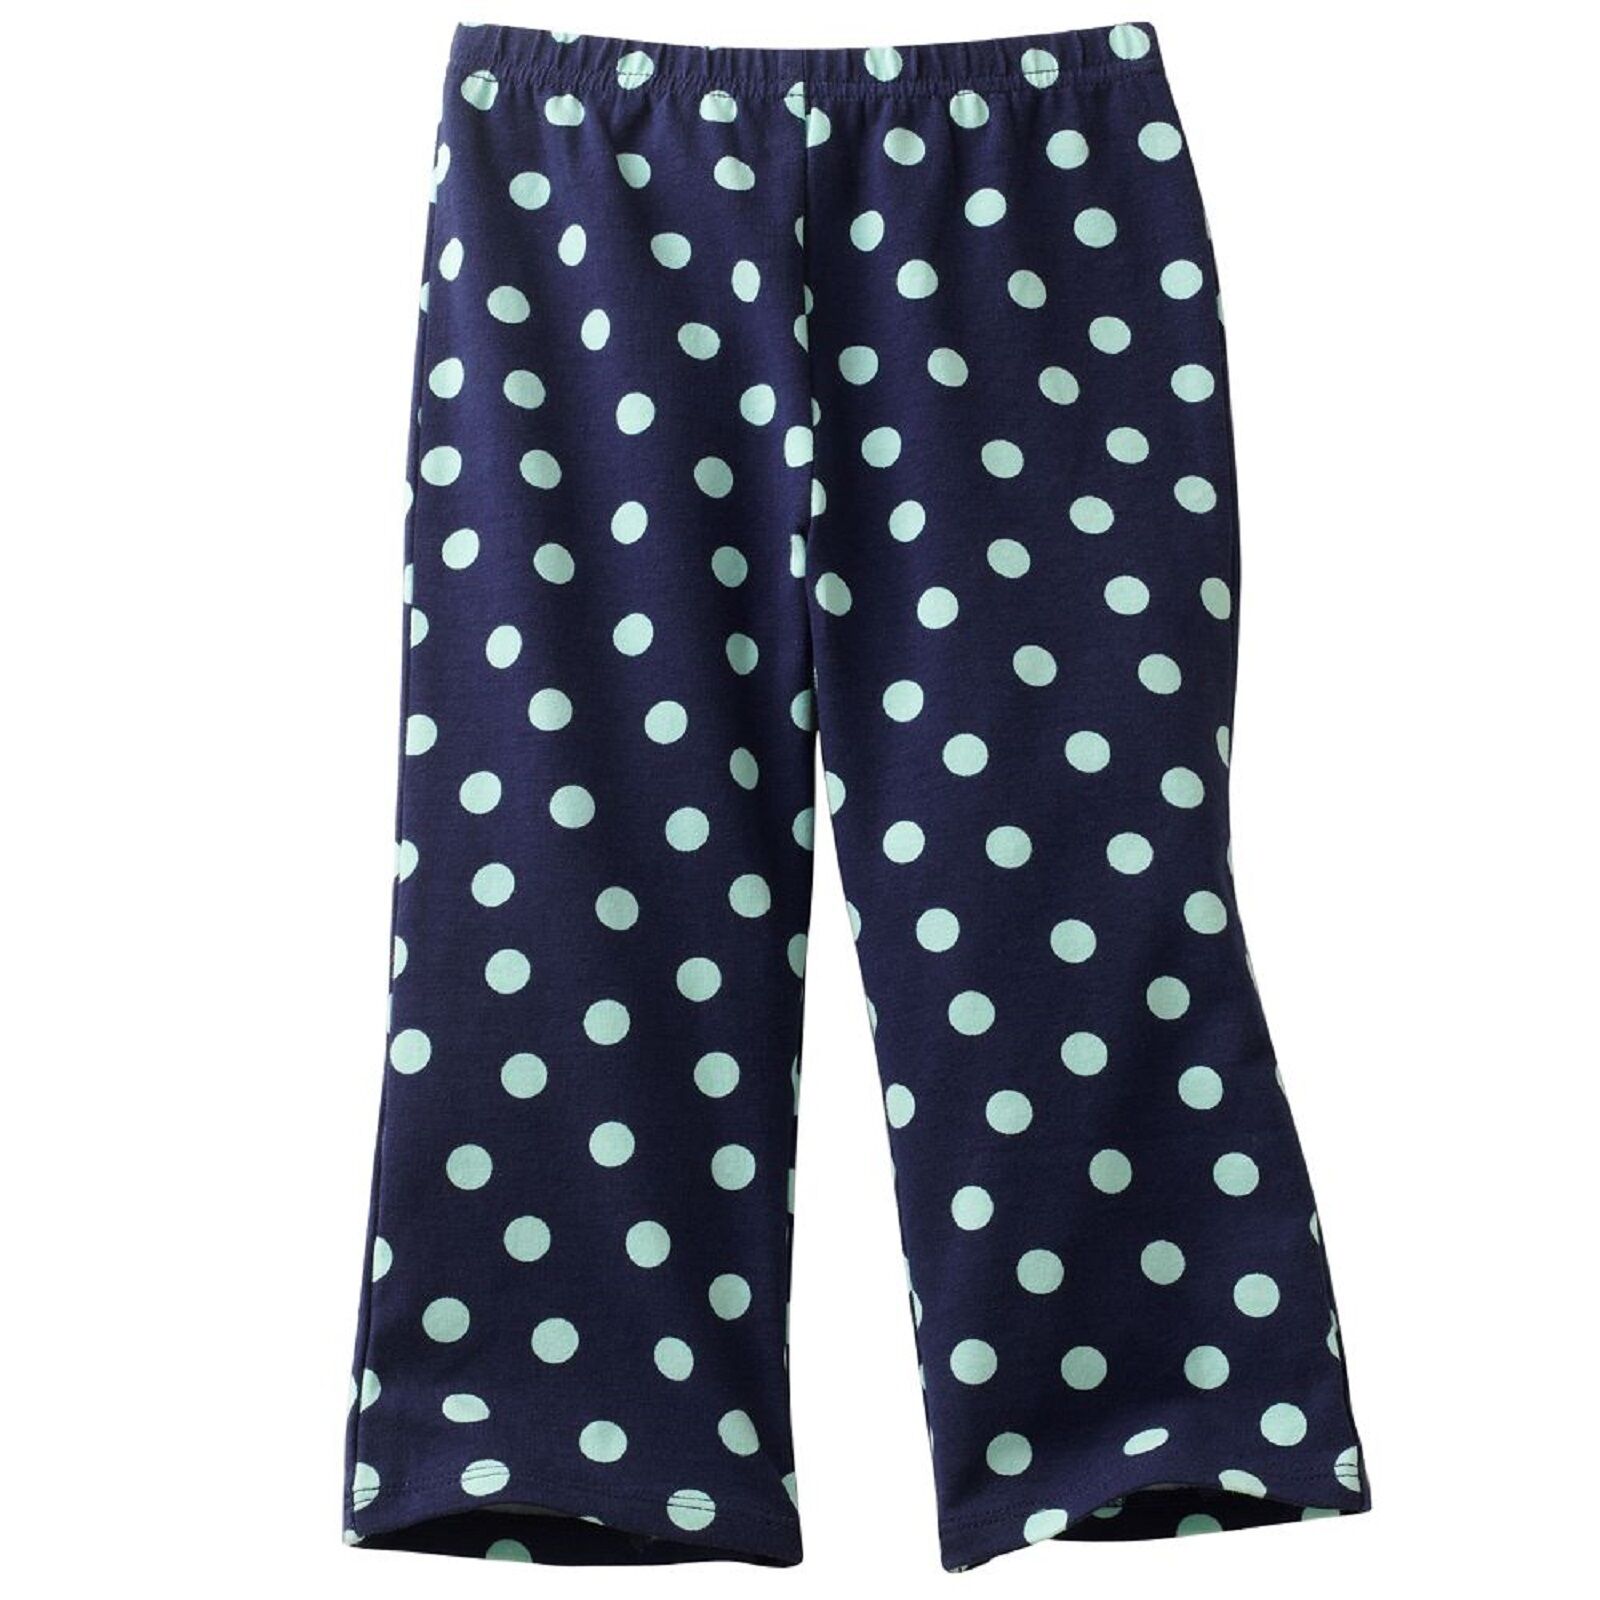 Jumping Beans Baby Girls  Bunny & Polka-Dot Pants 6 M New $12  navy turquoise